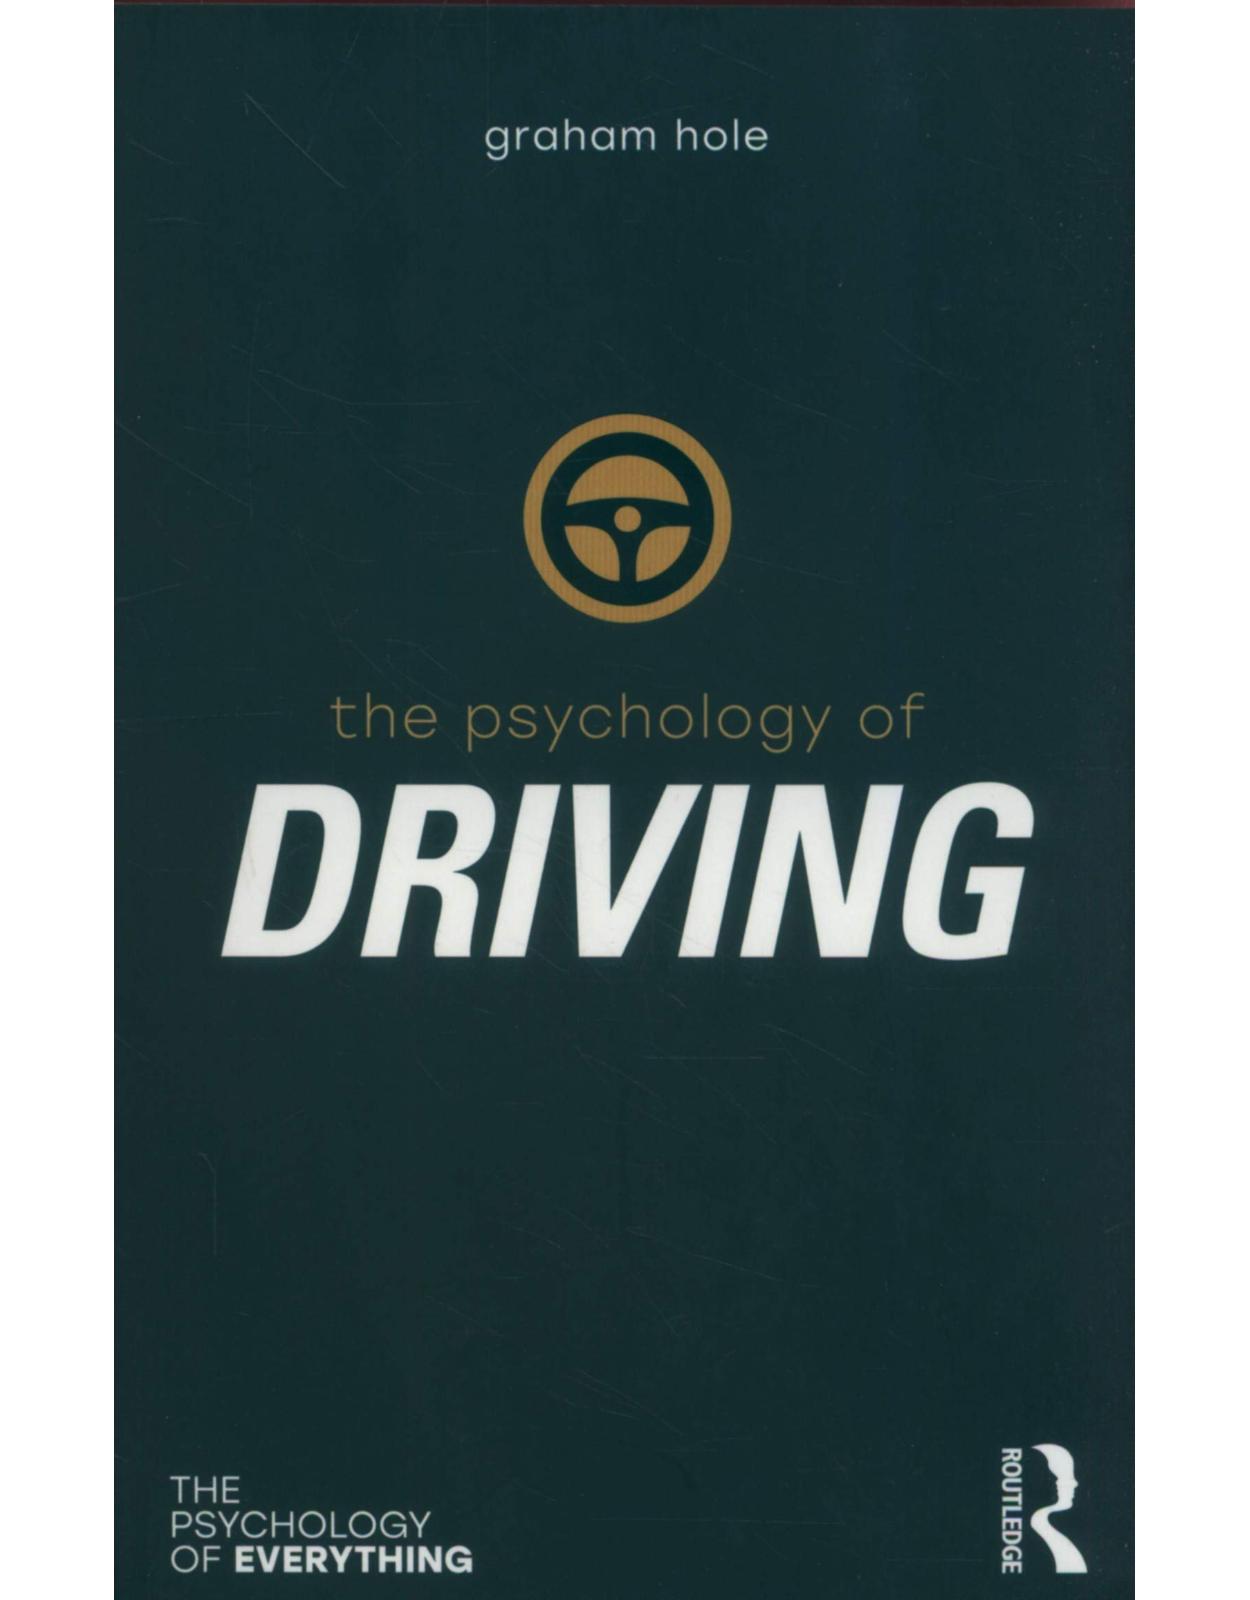 The Psychology of Driving (The Psychology of Everything) 